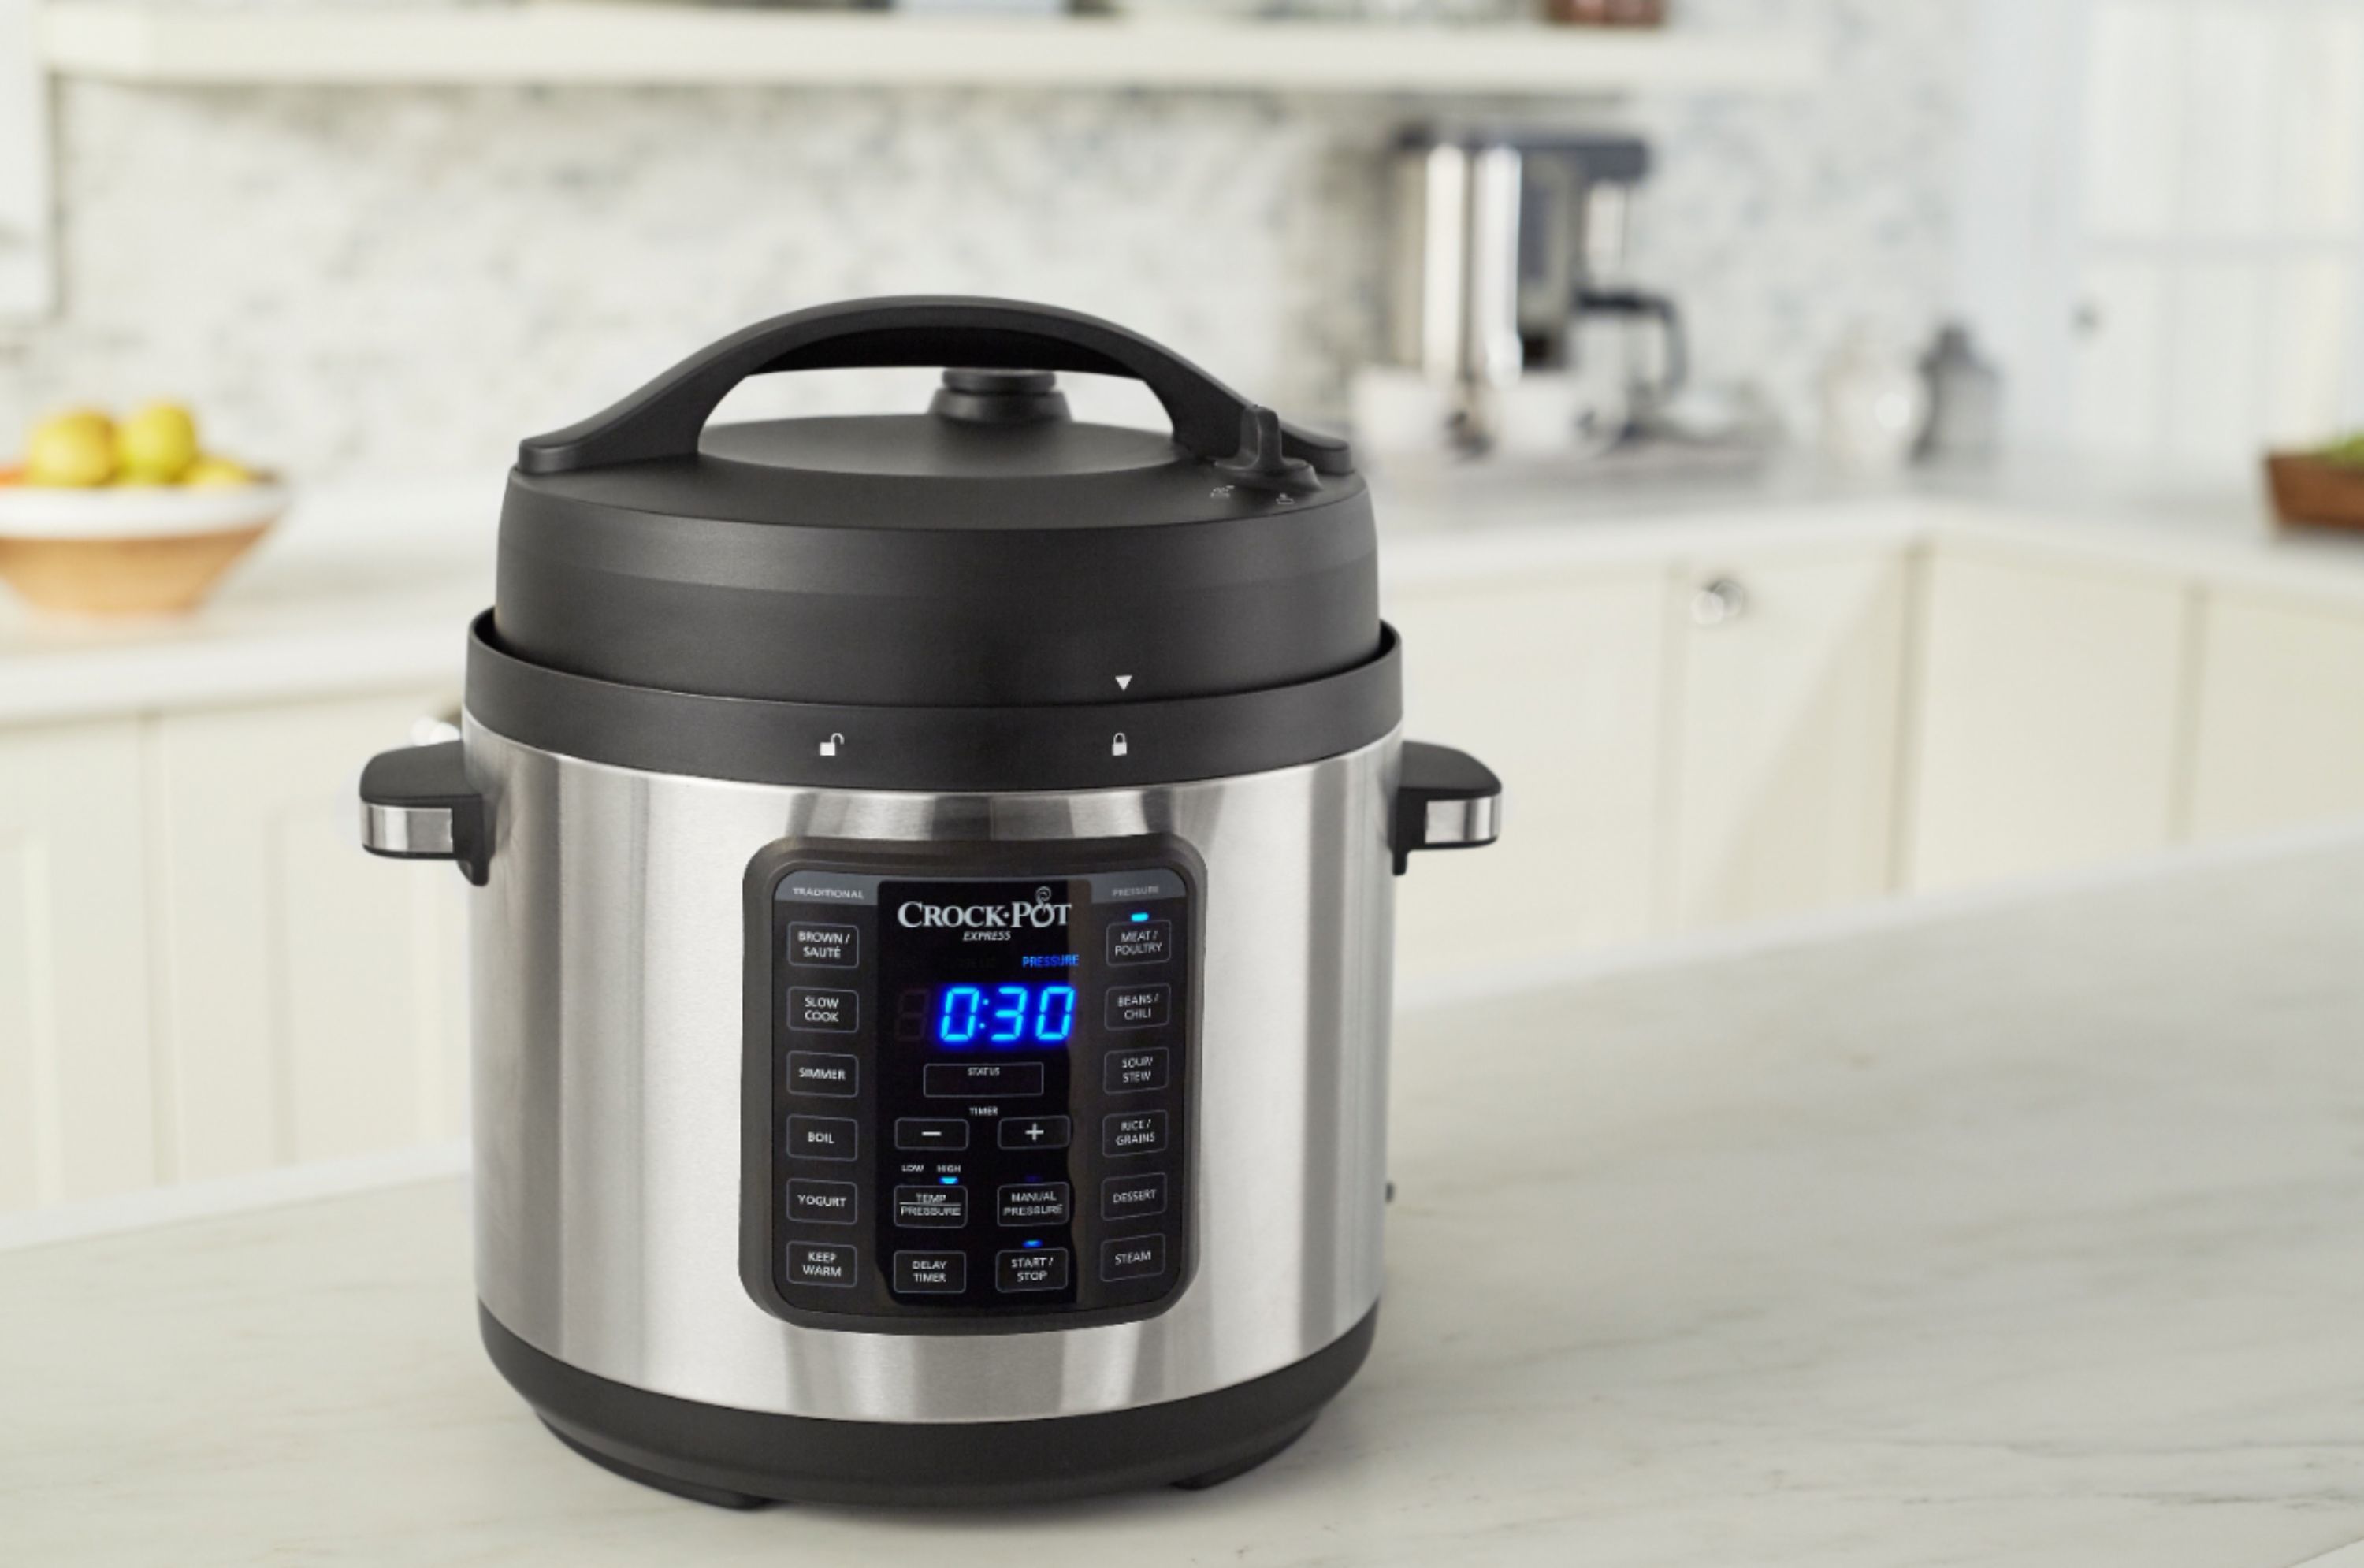 Crock-Pot® Express 6-Qt Oval Max Pressure Cooker, Stainless Steel